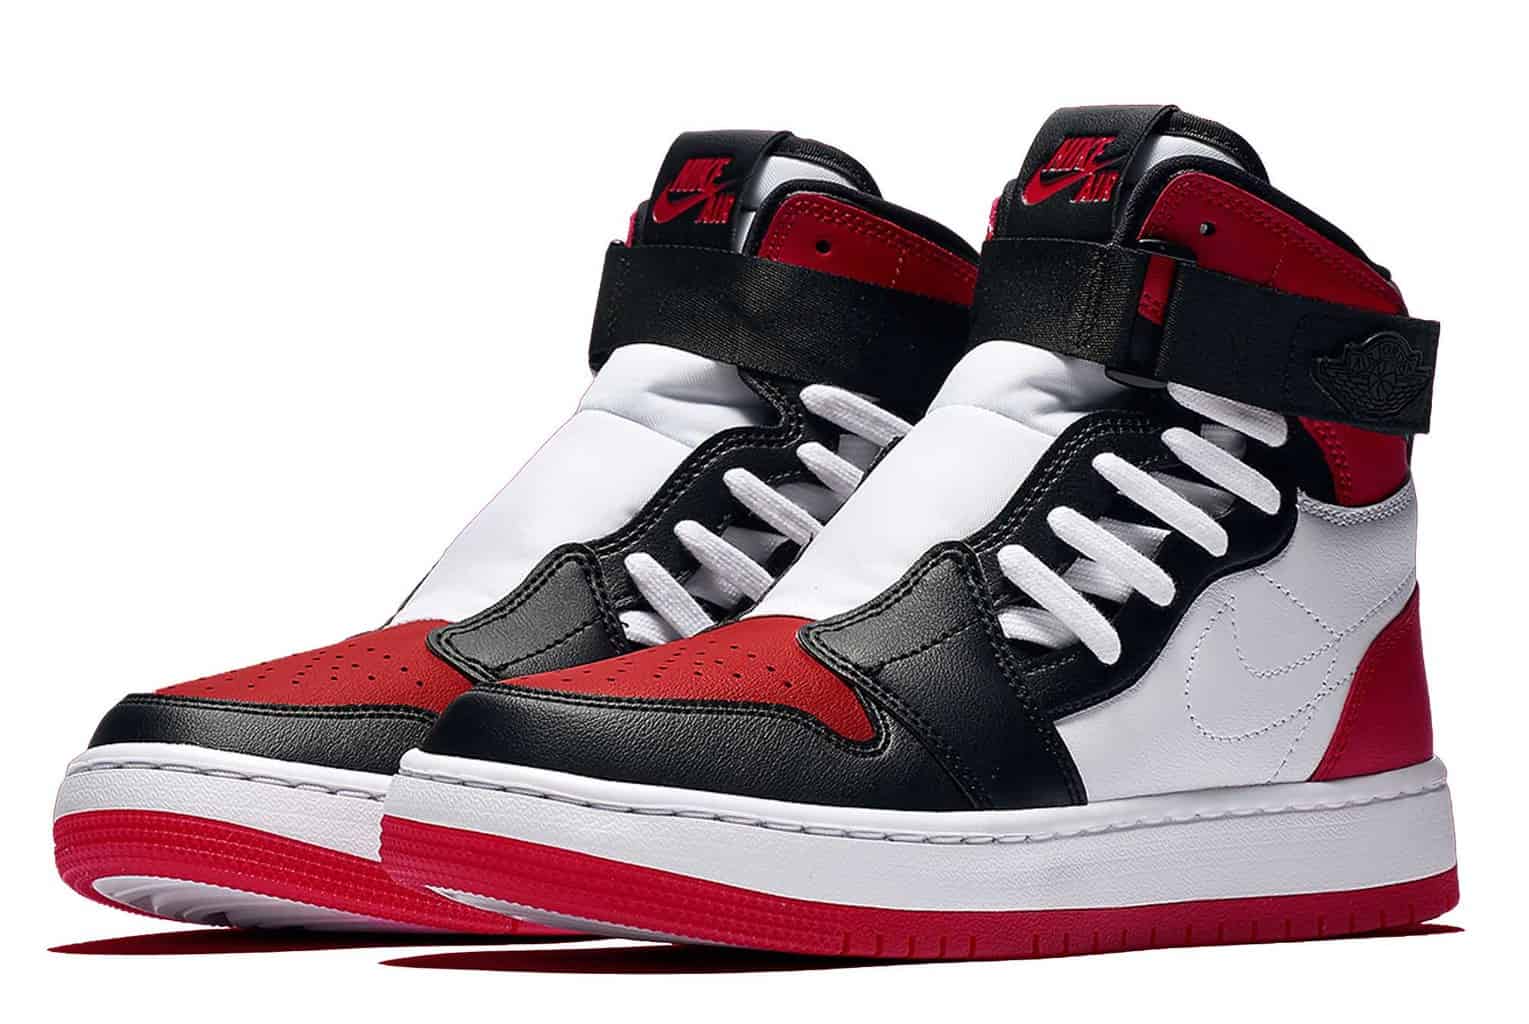 There's A New Air Jordan 1 On The Way 